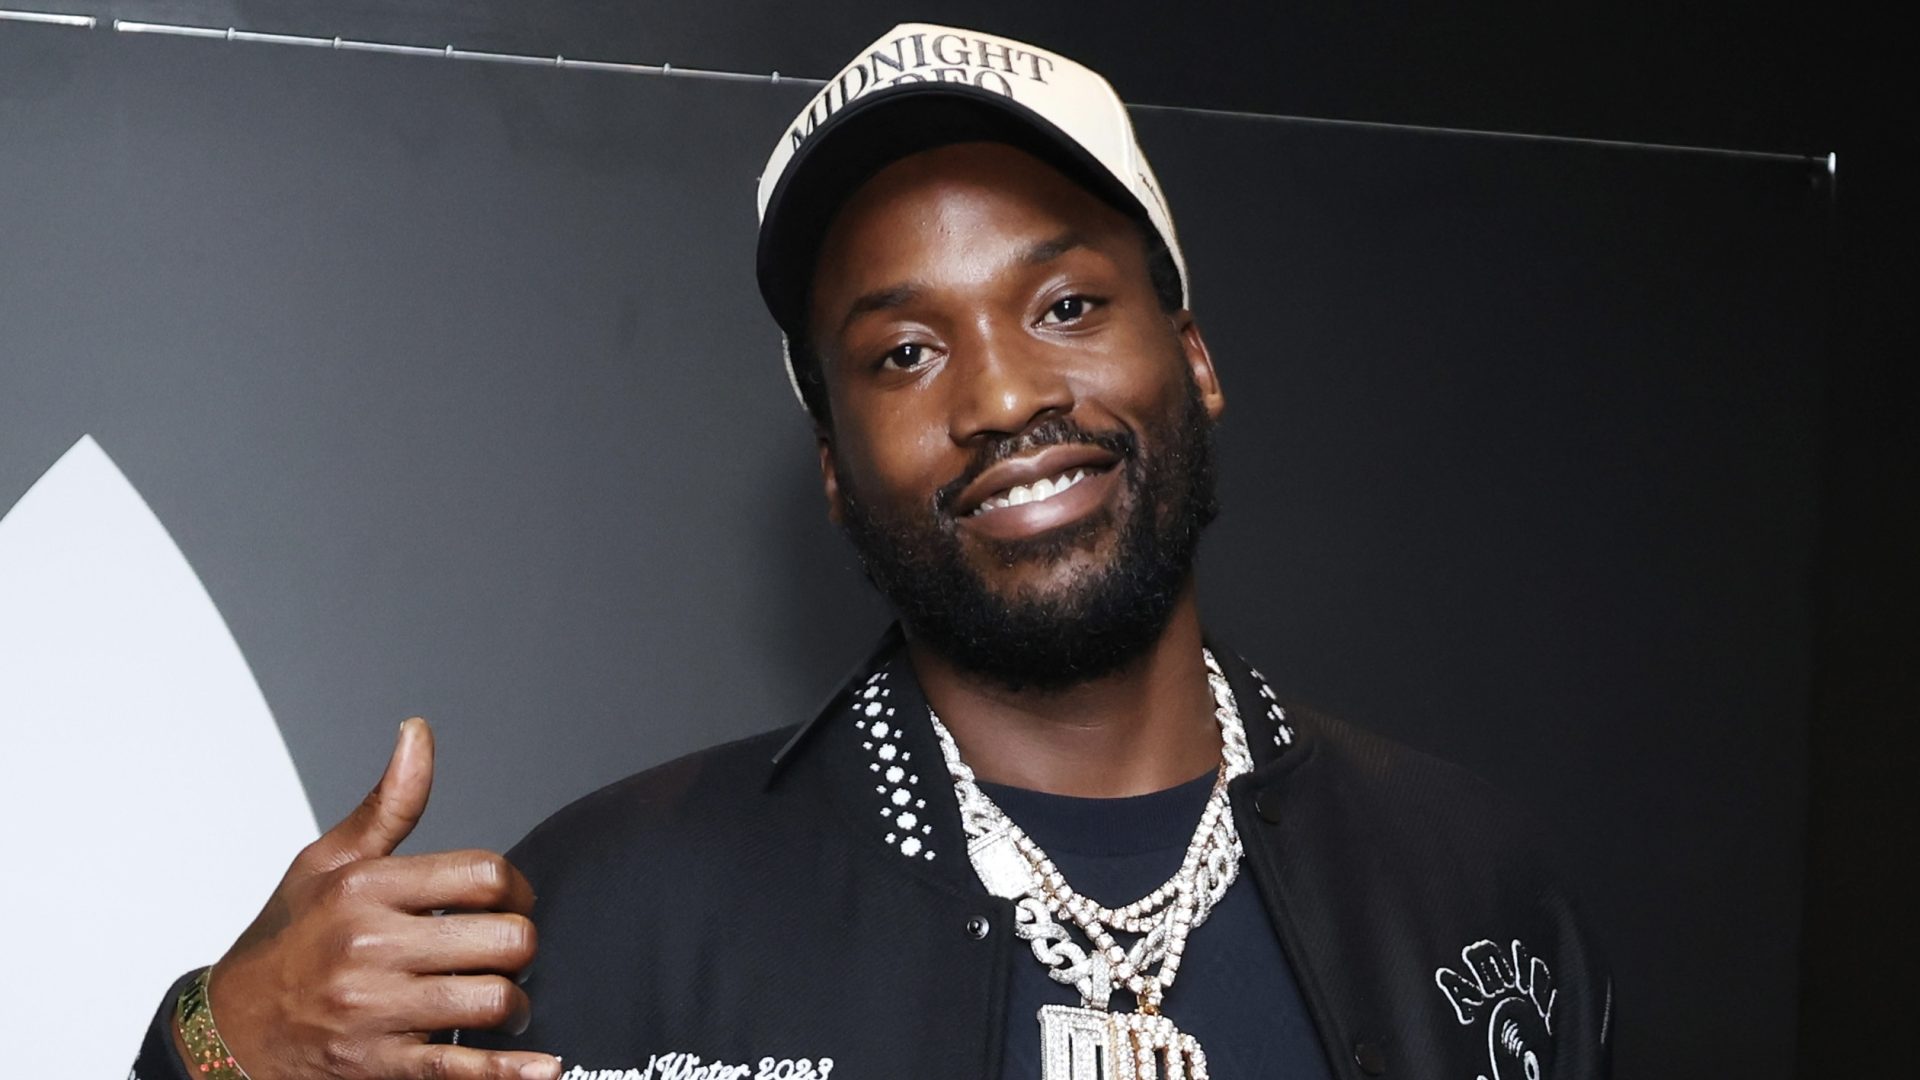 Social Media Goes IN After Meek Mill Shares THIS Photo Of Himself While On Vacation